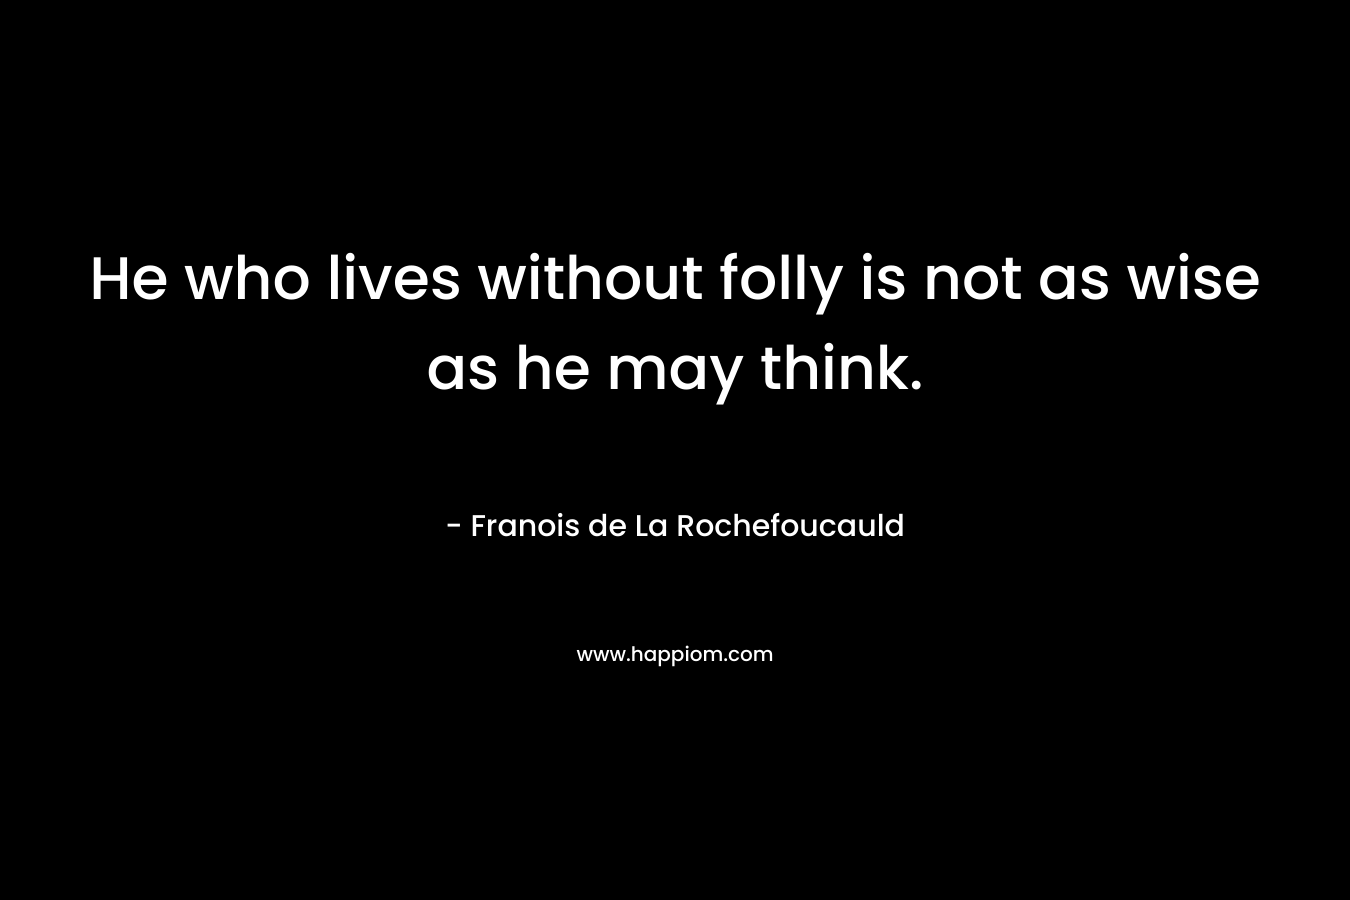 He who lives without folly is not as wise as he may think.